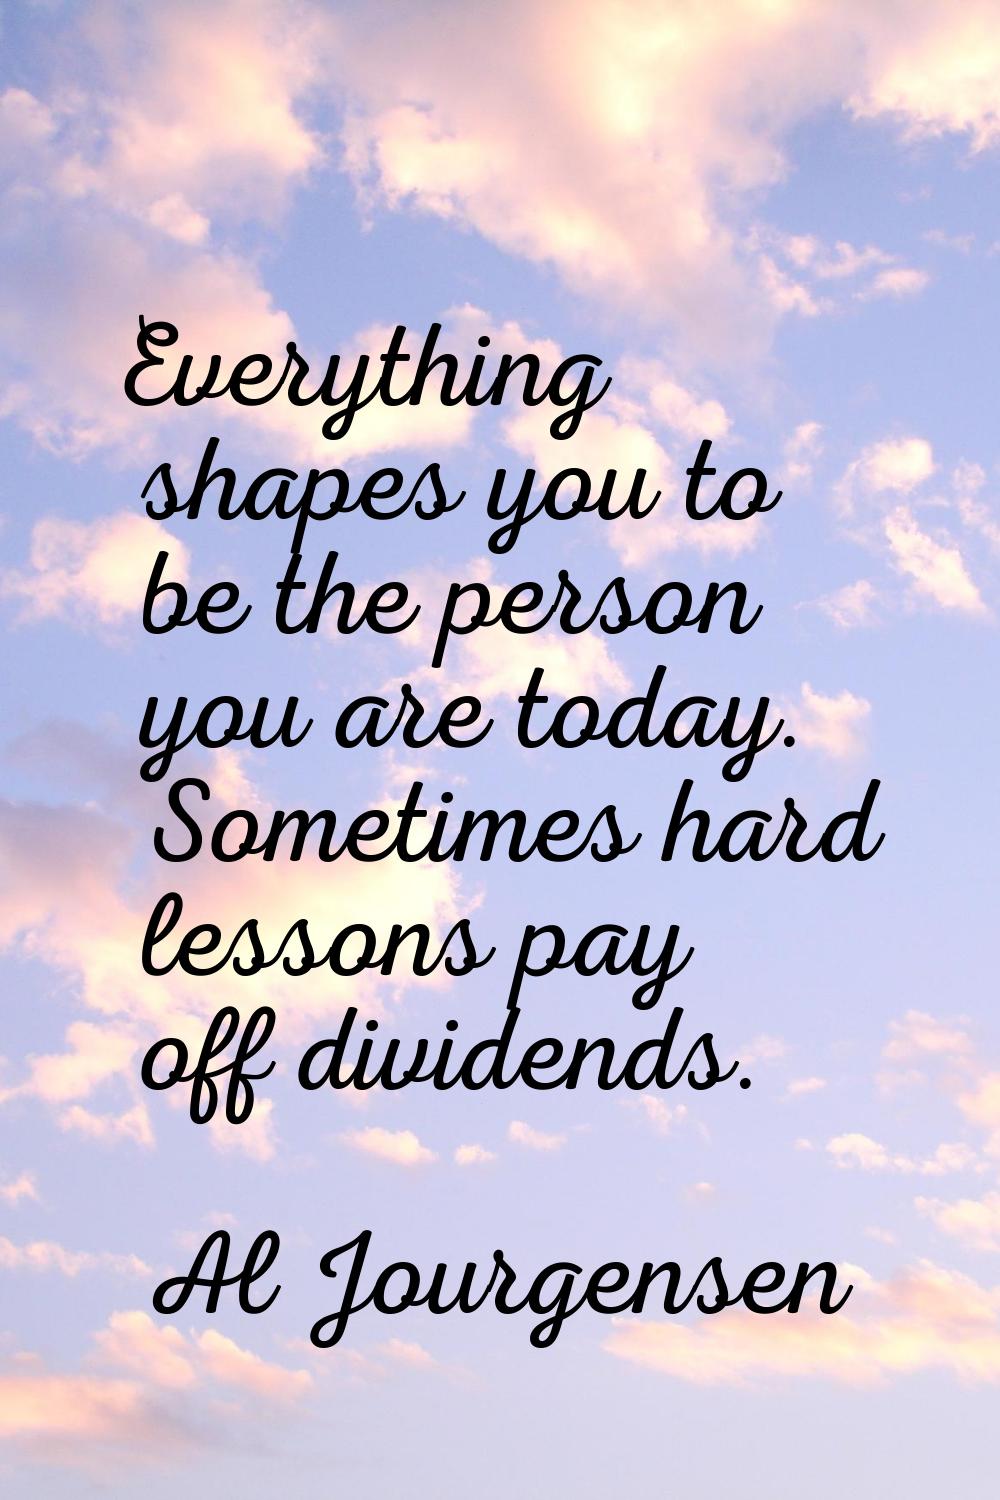 Everything shapes you to be the person you are today. Sometimes hard lessons pay off dividends.